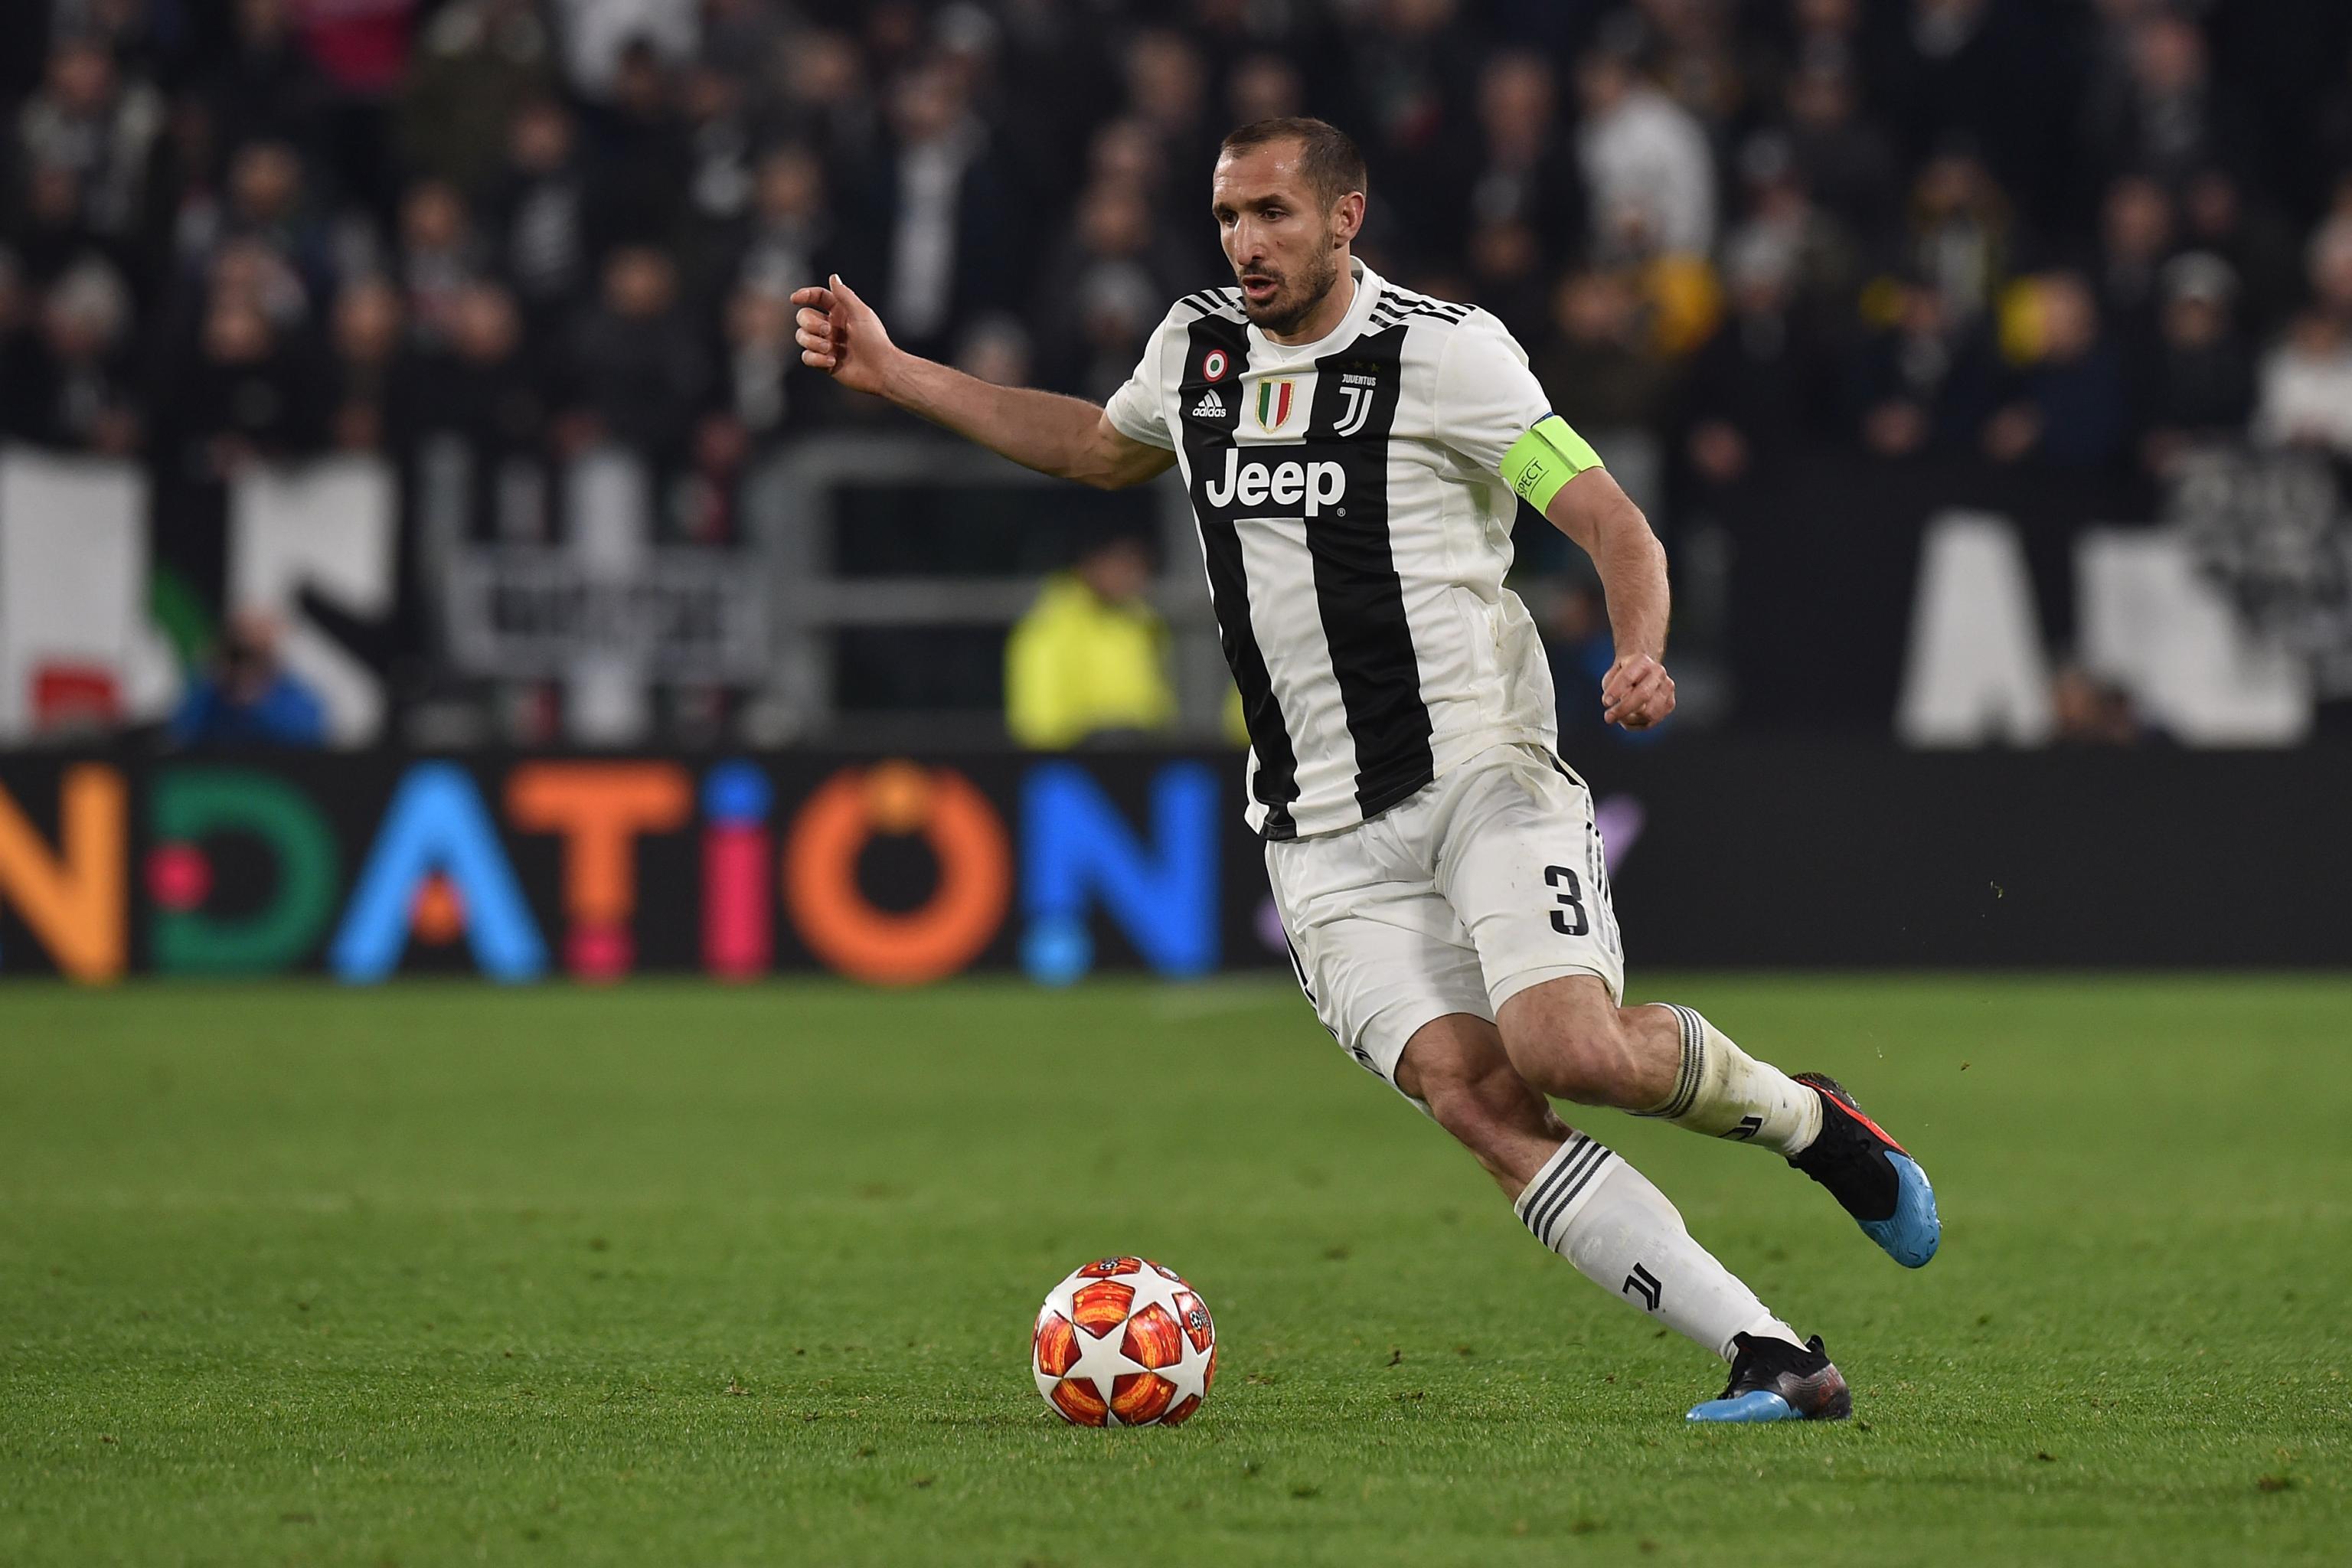 Juventus Giorgio Chiellini Reportedly A Serious Doubt For Ajax Due To Injury Bleacher Report Latest News Videos And Highlights